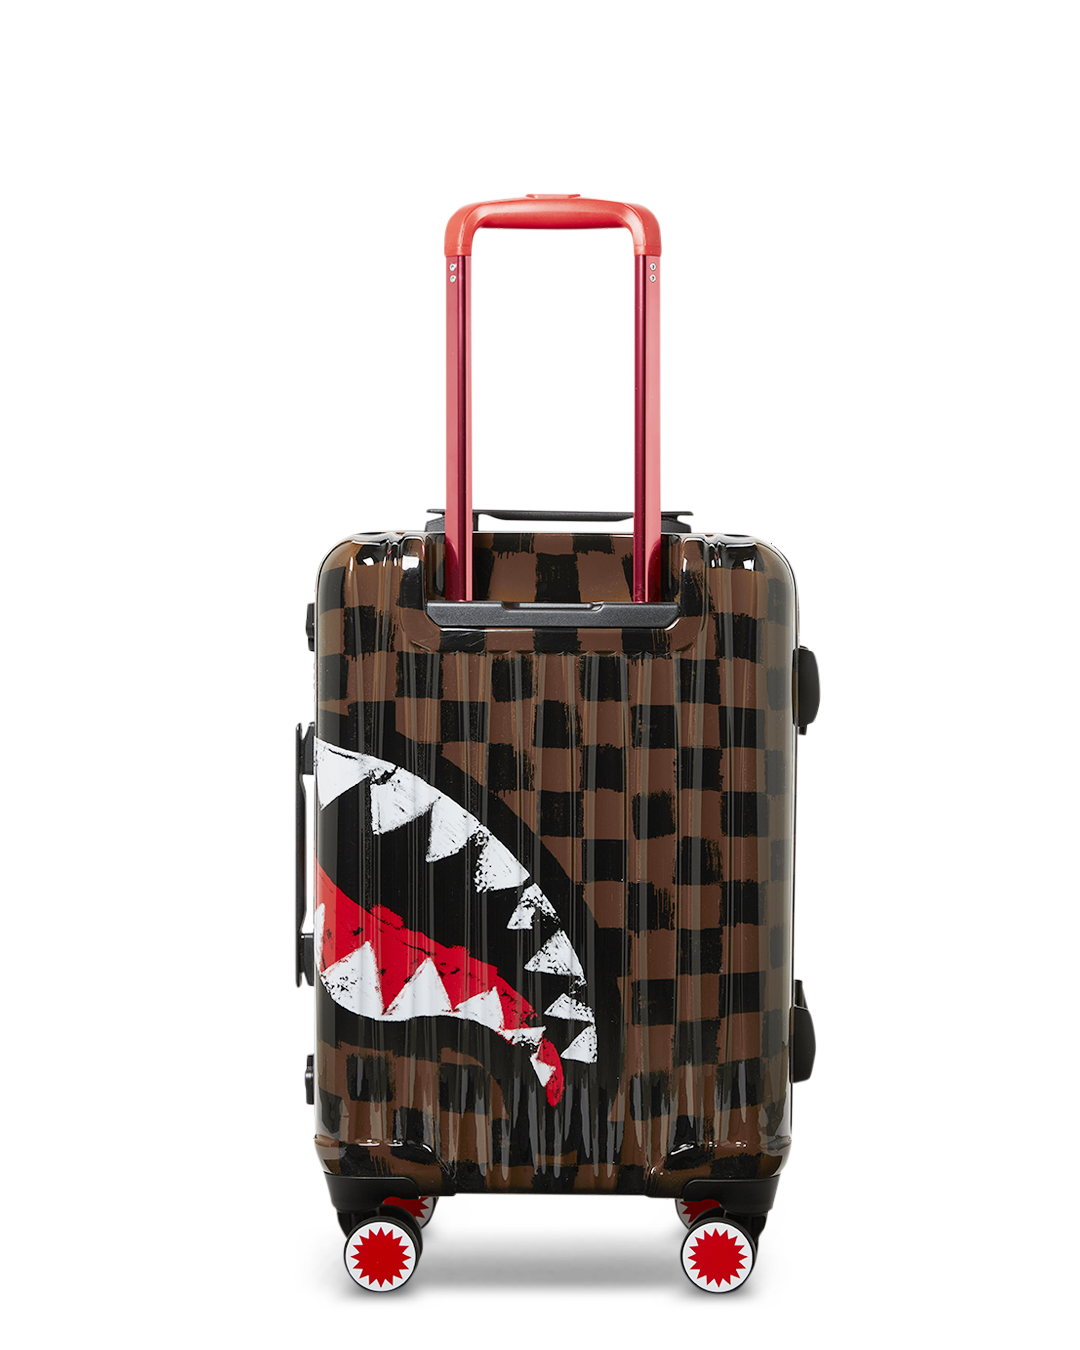 SHARKS IN PARIS PAINT CARRY-ON LUGGAGE